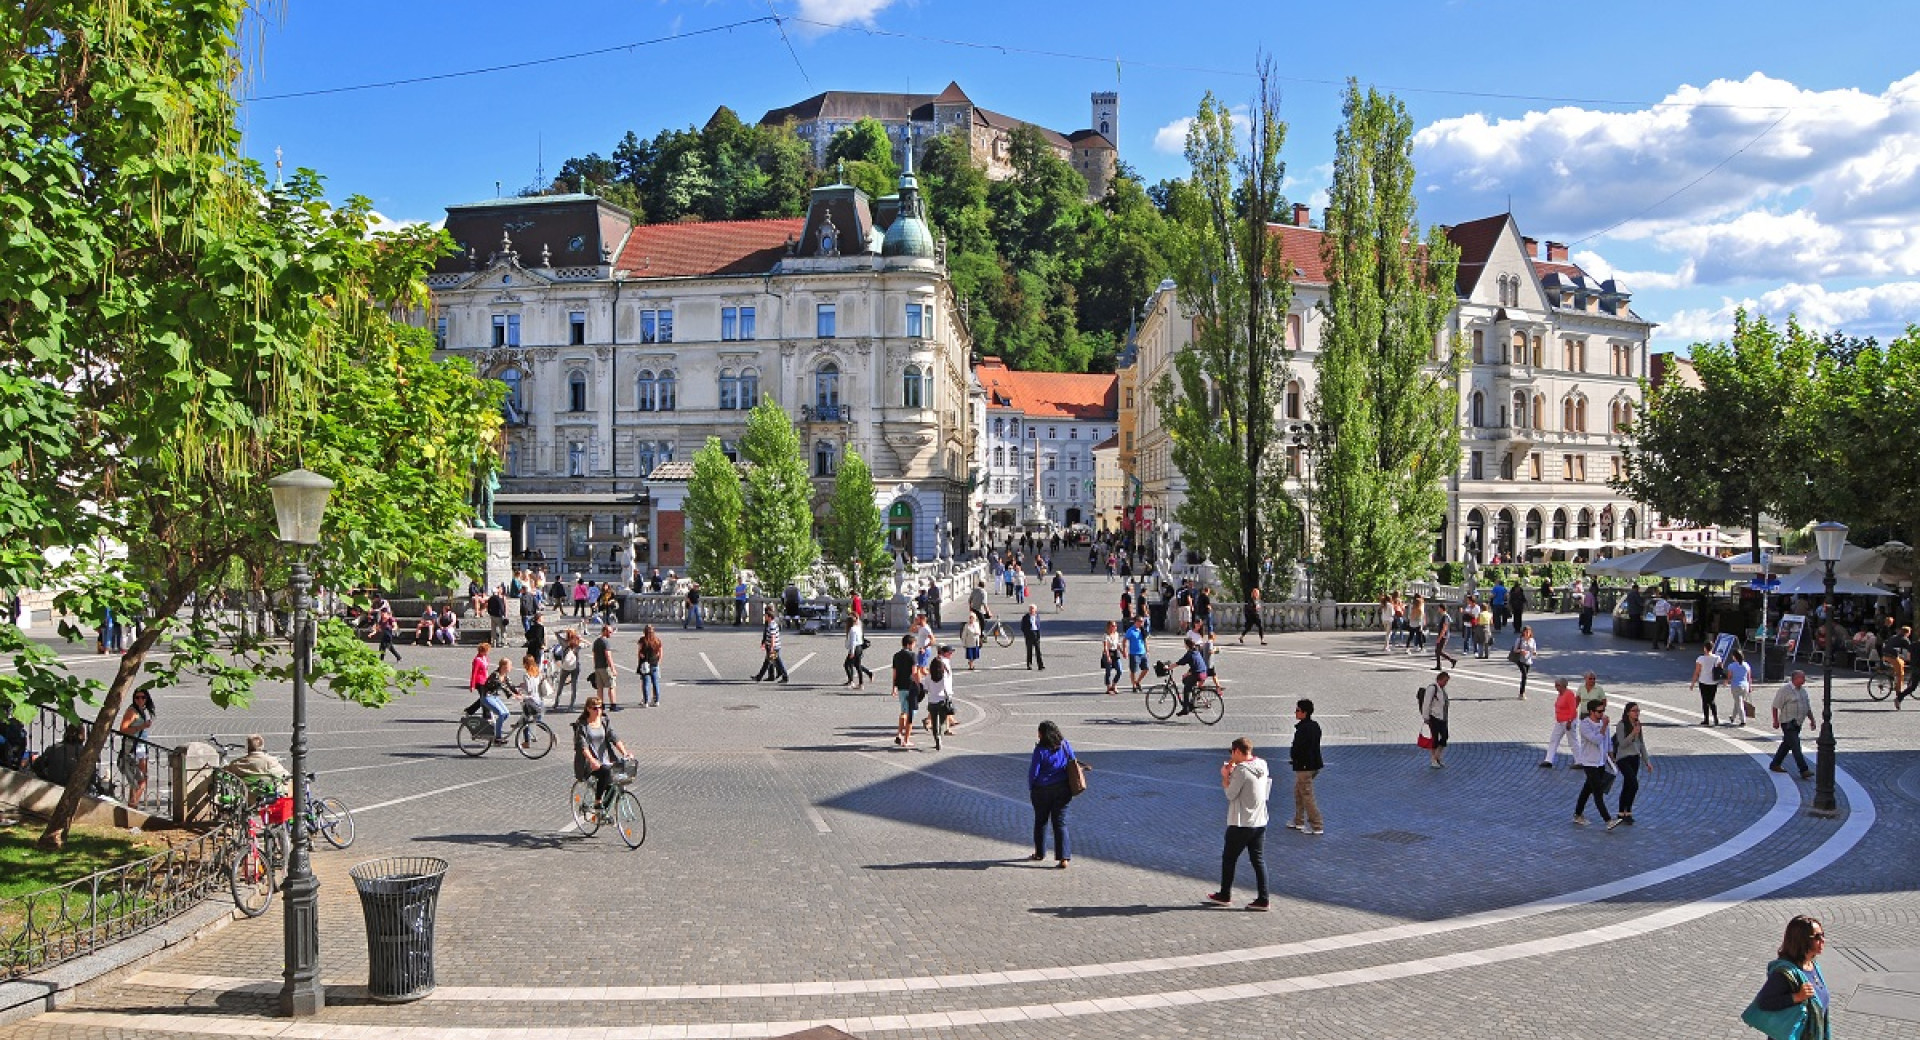 People walking in the city square with trees all around.